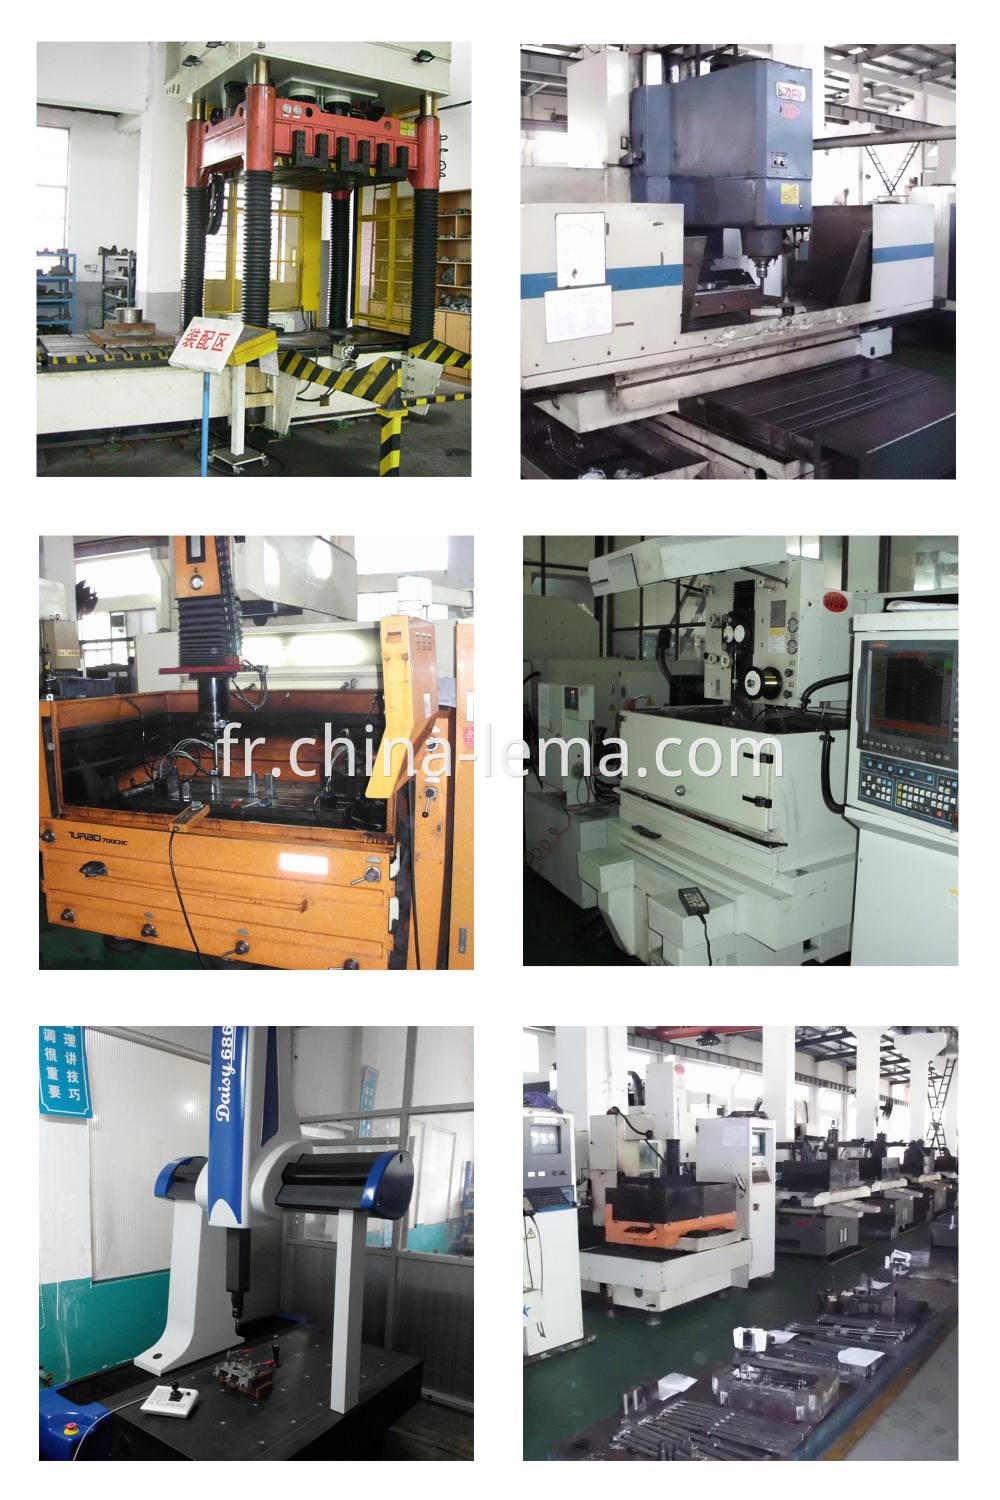 Mould equipment and CMM